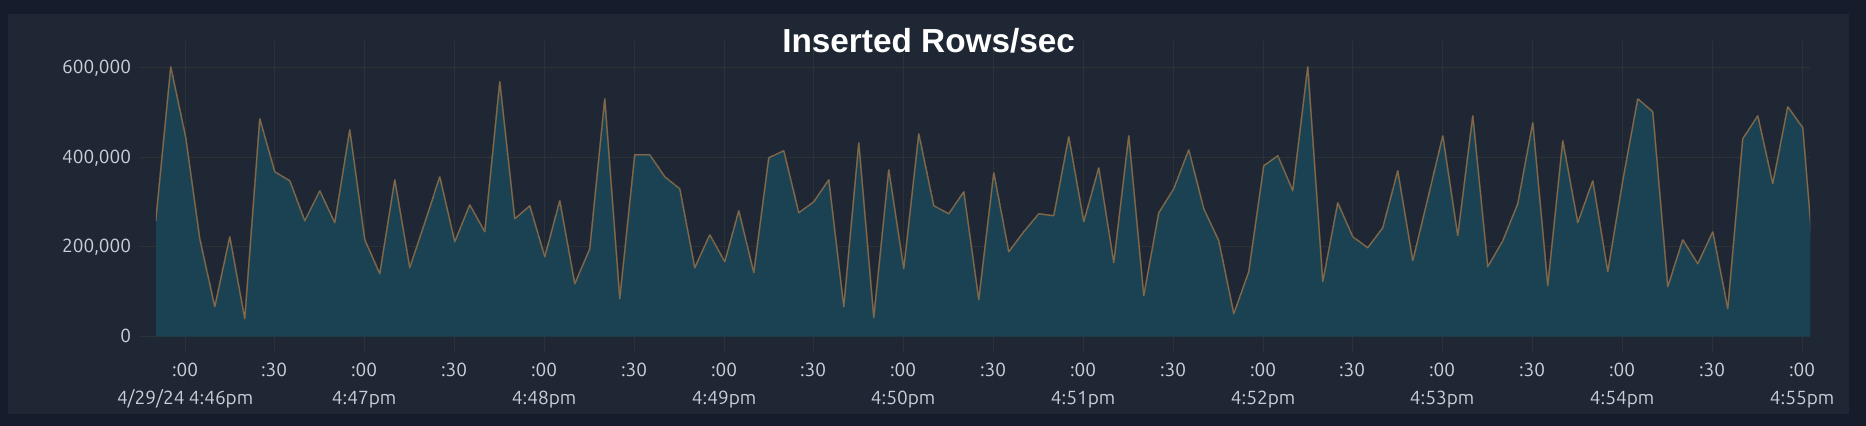 ClickHouse Inserted Rows/sec